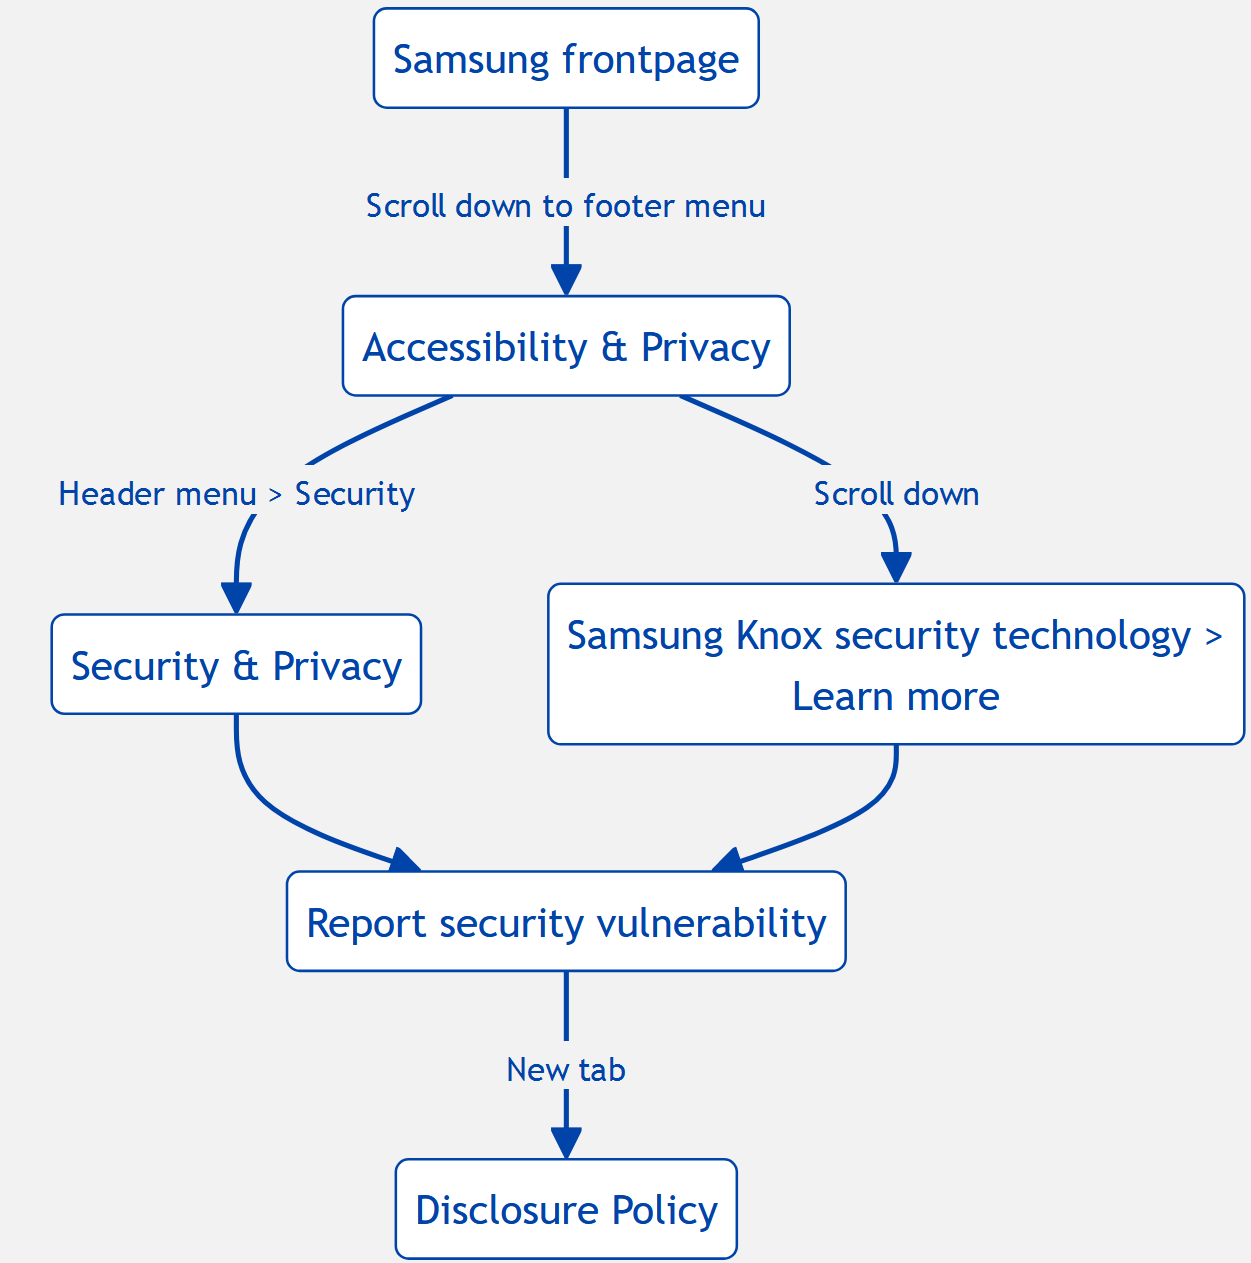 User journey for accessing Samsung VDP